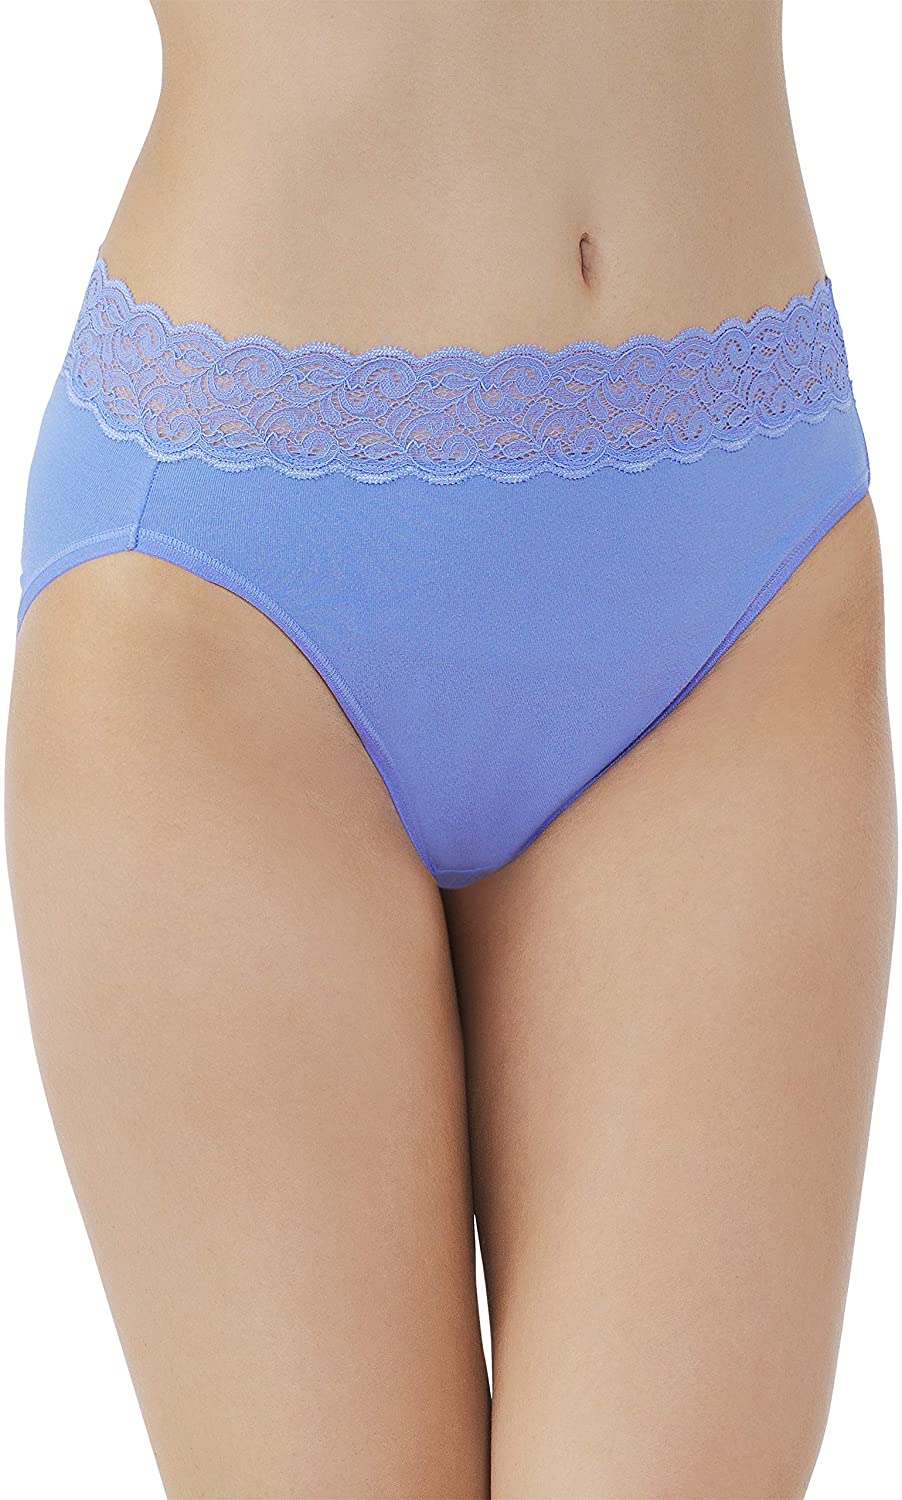 Price:$8.00 Vanity Fair Women's Flattering Lace Cotton Stretch Hi Cut Panty 13395 at Amazon Women’s Clothing store